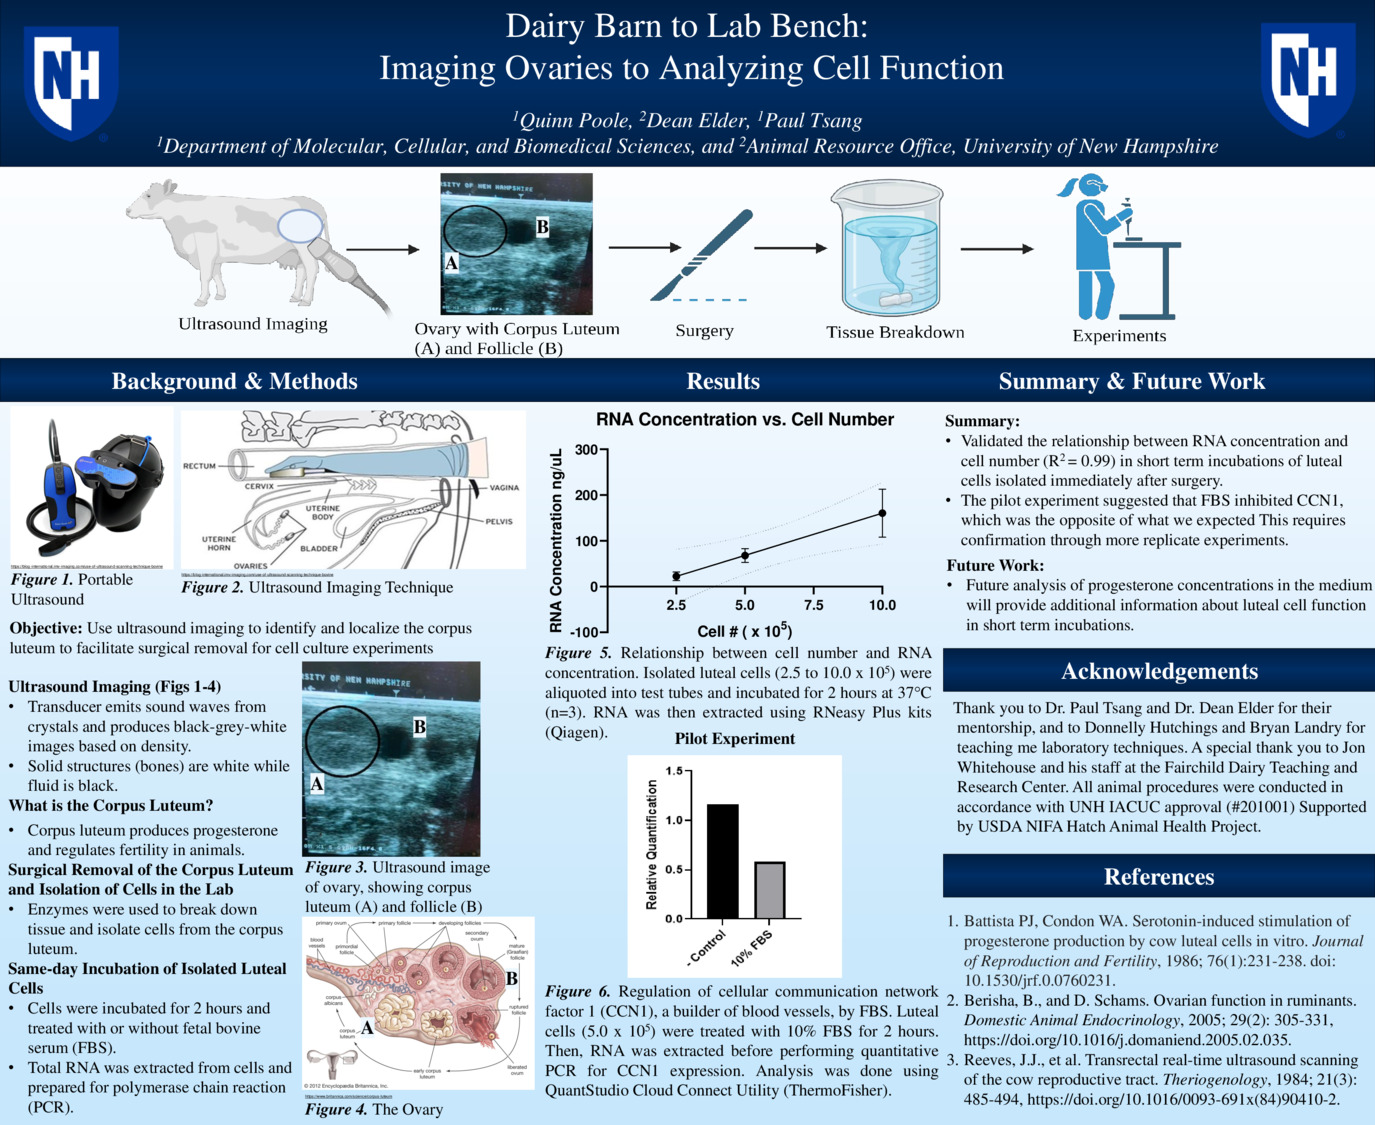 Dairy Barn To Lab Bench: Imaging Ovaries To Analyzing Cell Function by qap1002